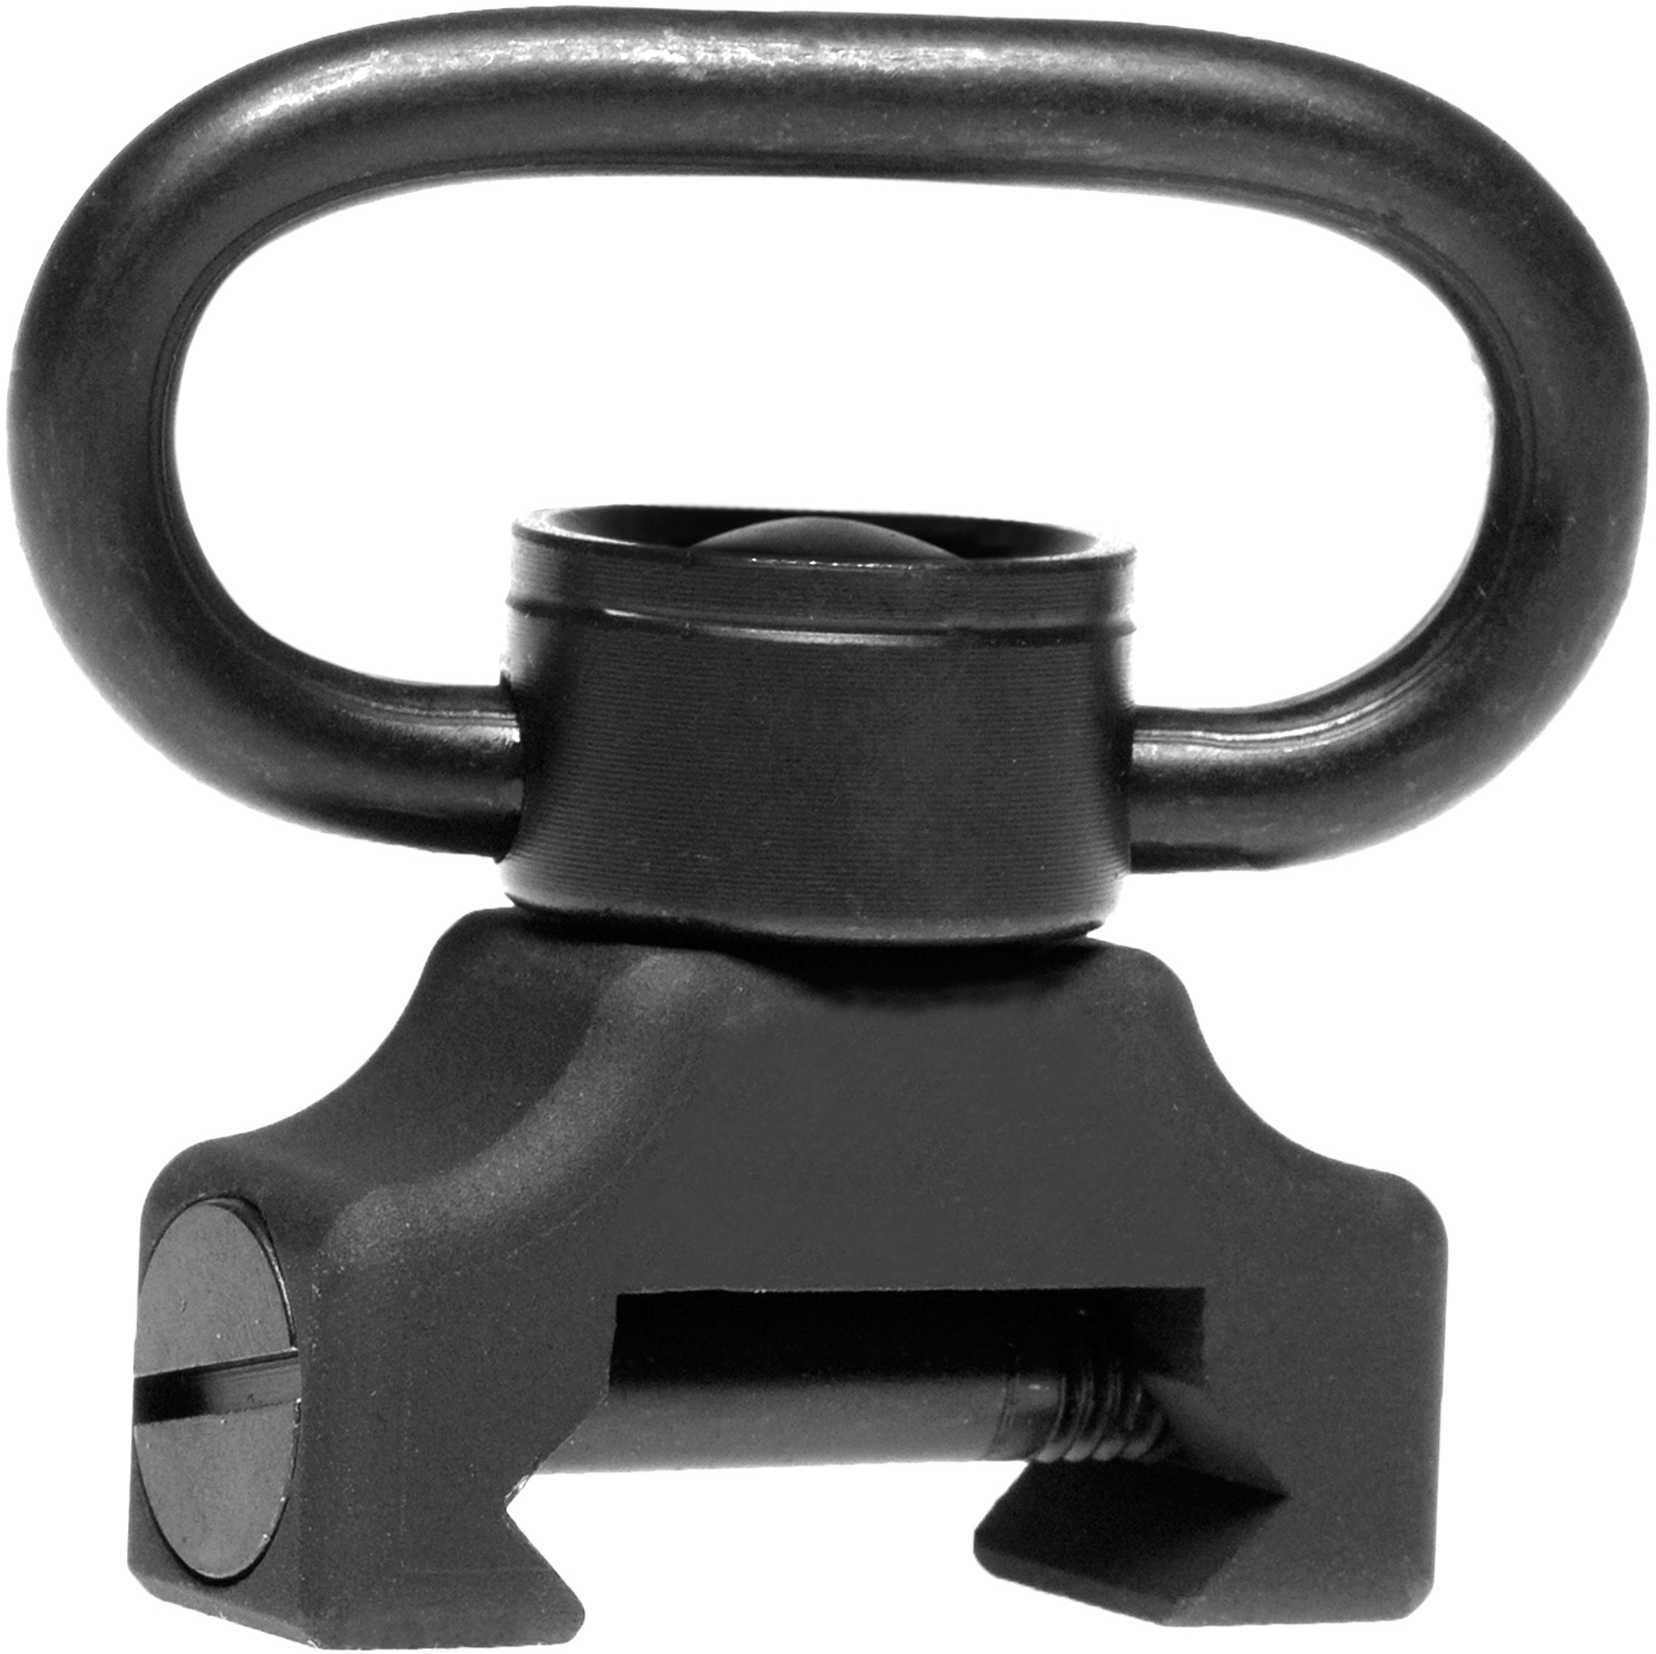 Troy Industries Q.D. 360 Push Button Mount with Swivel SMOU-PBS-00BT-00 ...